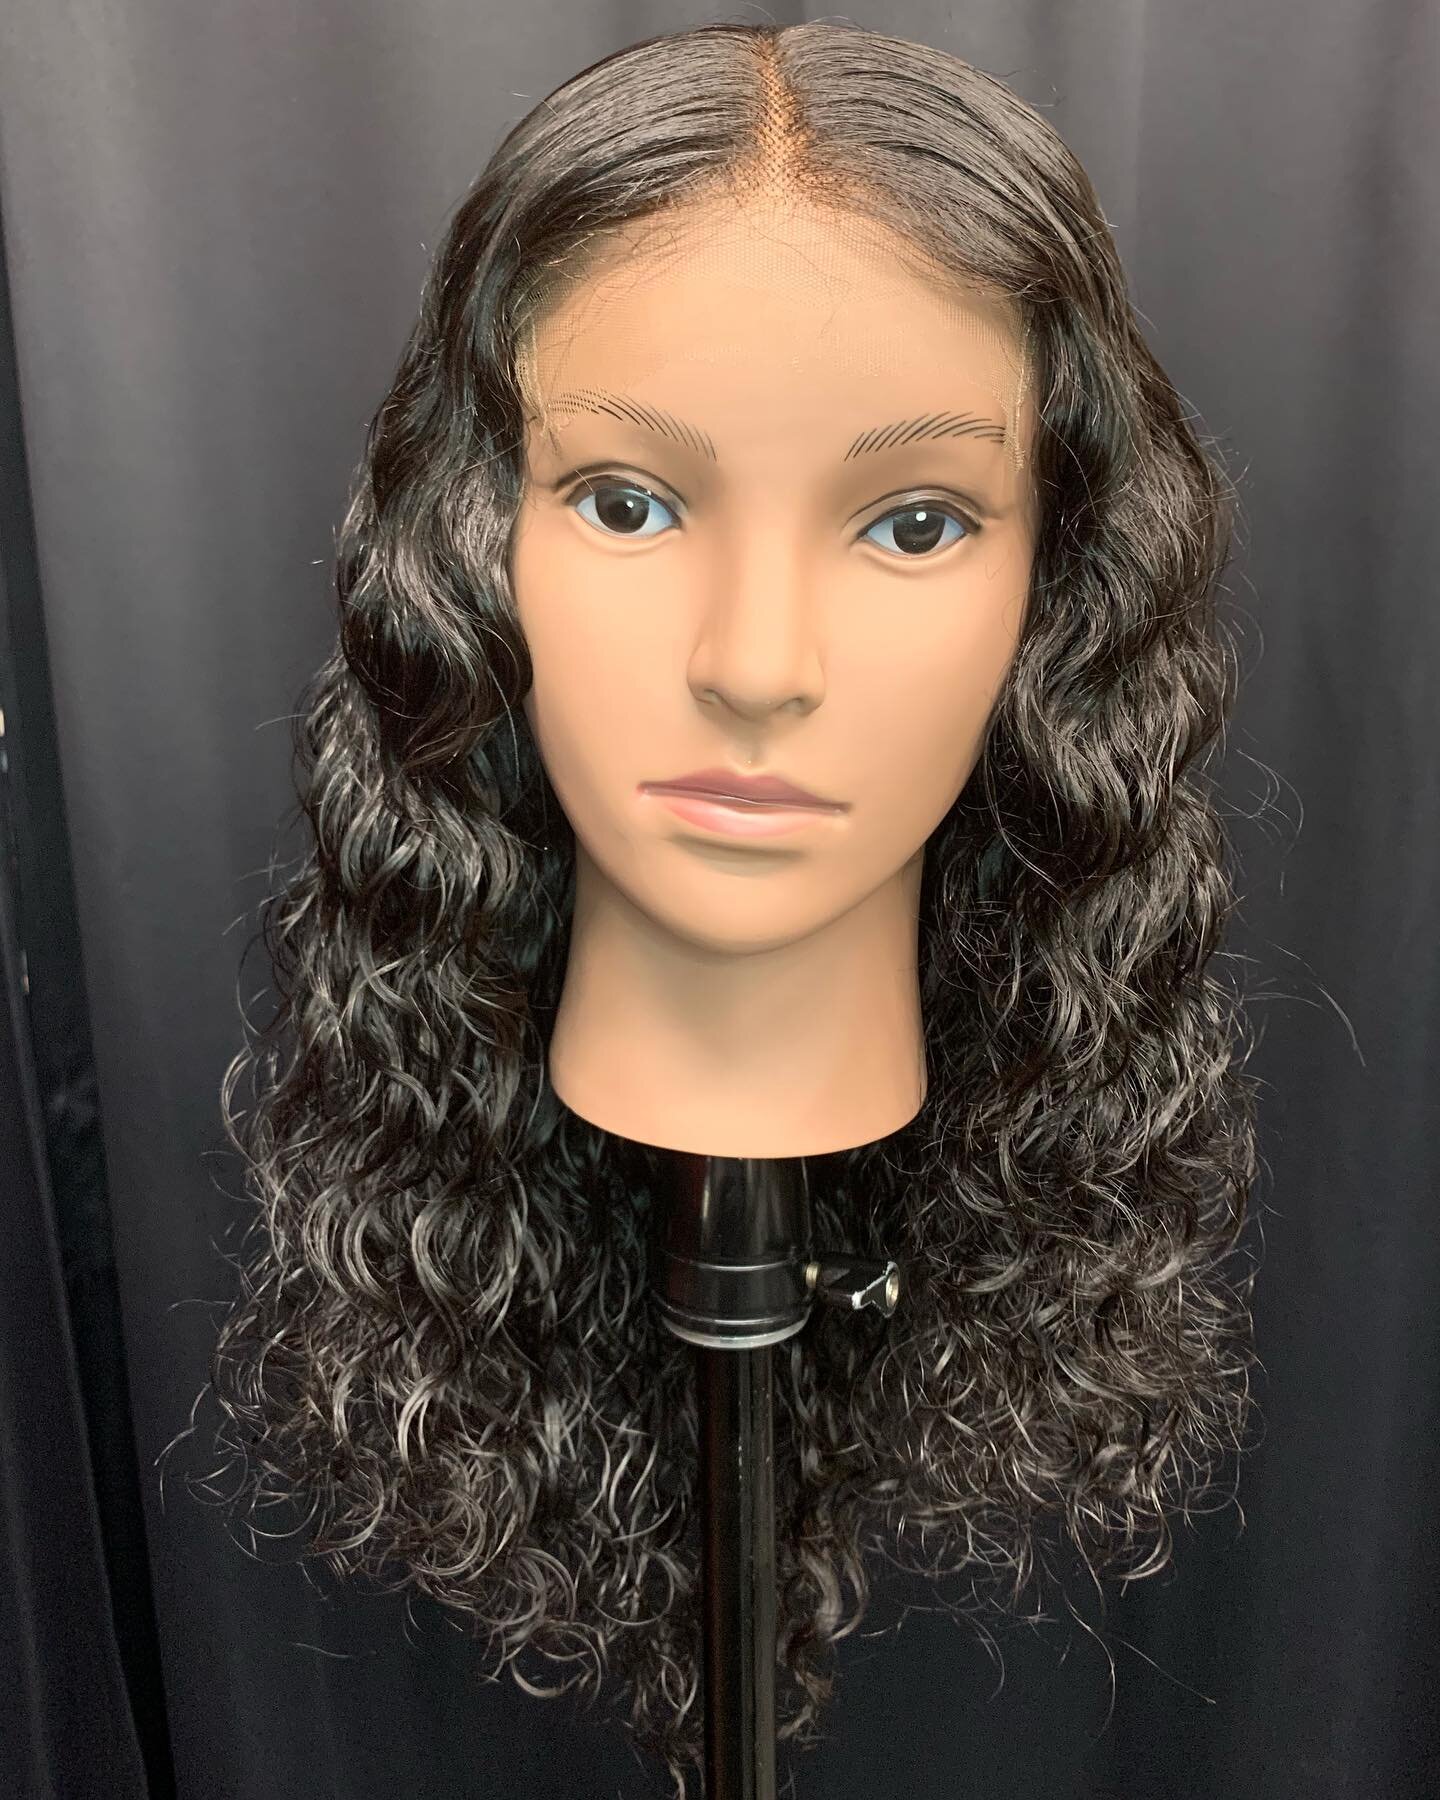 Visage The Face of Beauty Raffle!! 1st Prize: Visage Custom Unit 
2nd Prize: Three Visage Bundles 22/24/26

3rd Prize: Shampoo and Style

Unit and Bundles 💯 % Virgin Indian Hair

Call or text 443-691-7784 or stop by the salon 10084 Reisterstown Rd.,